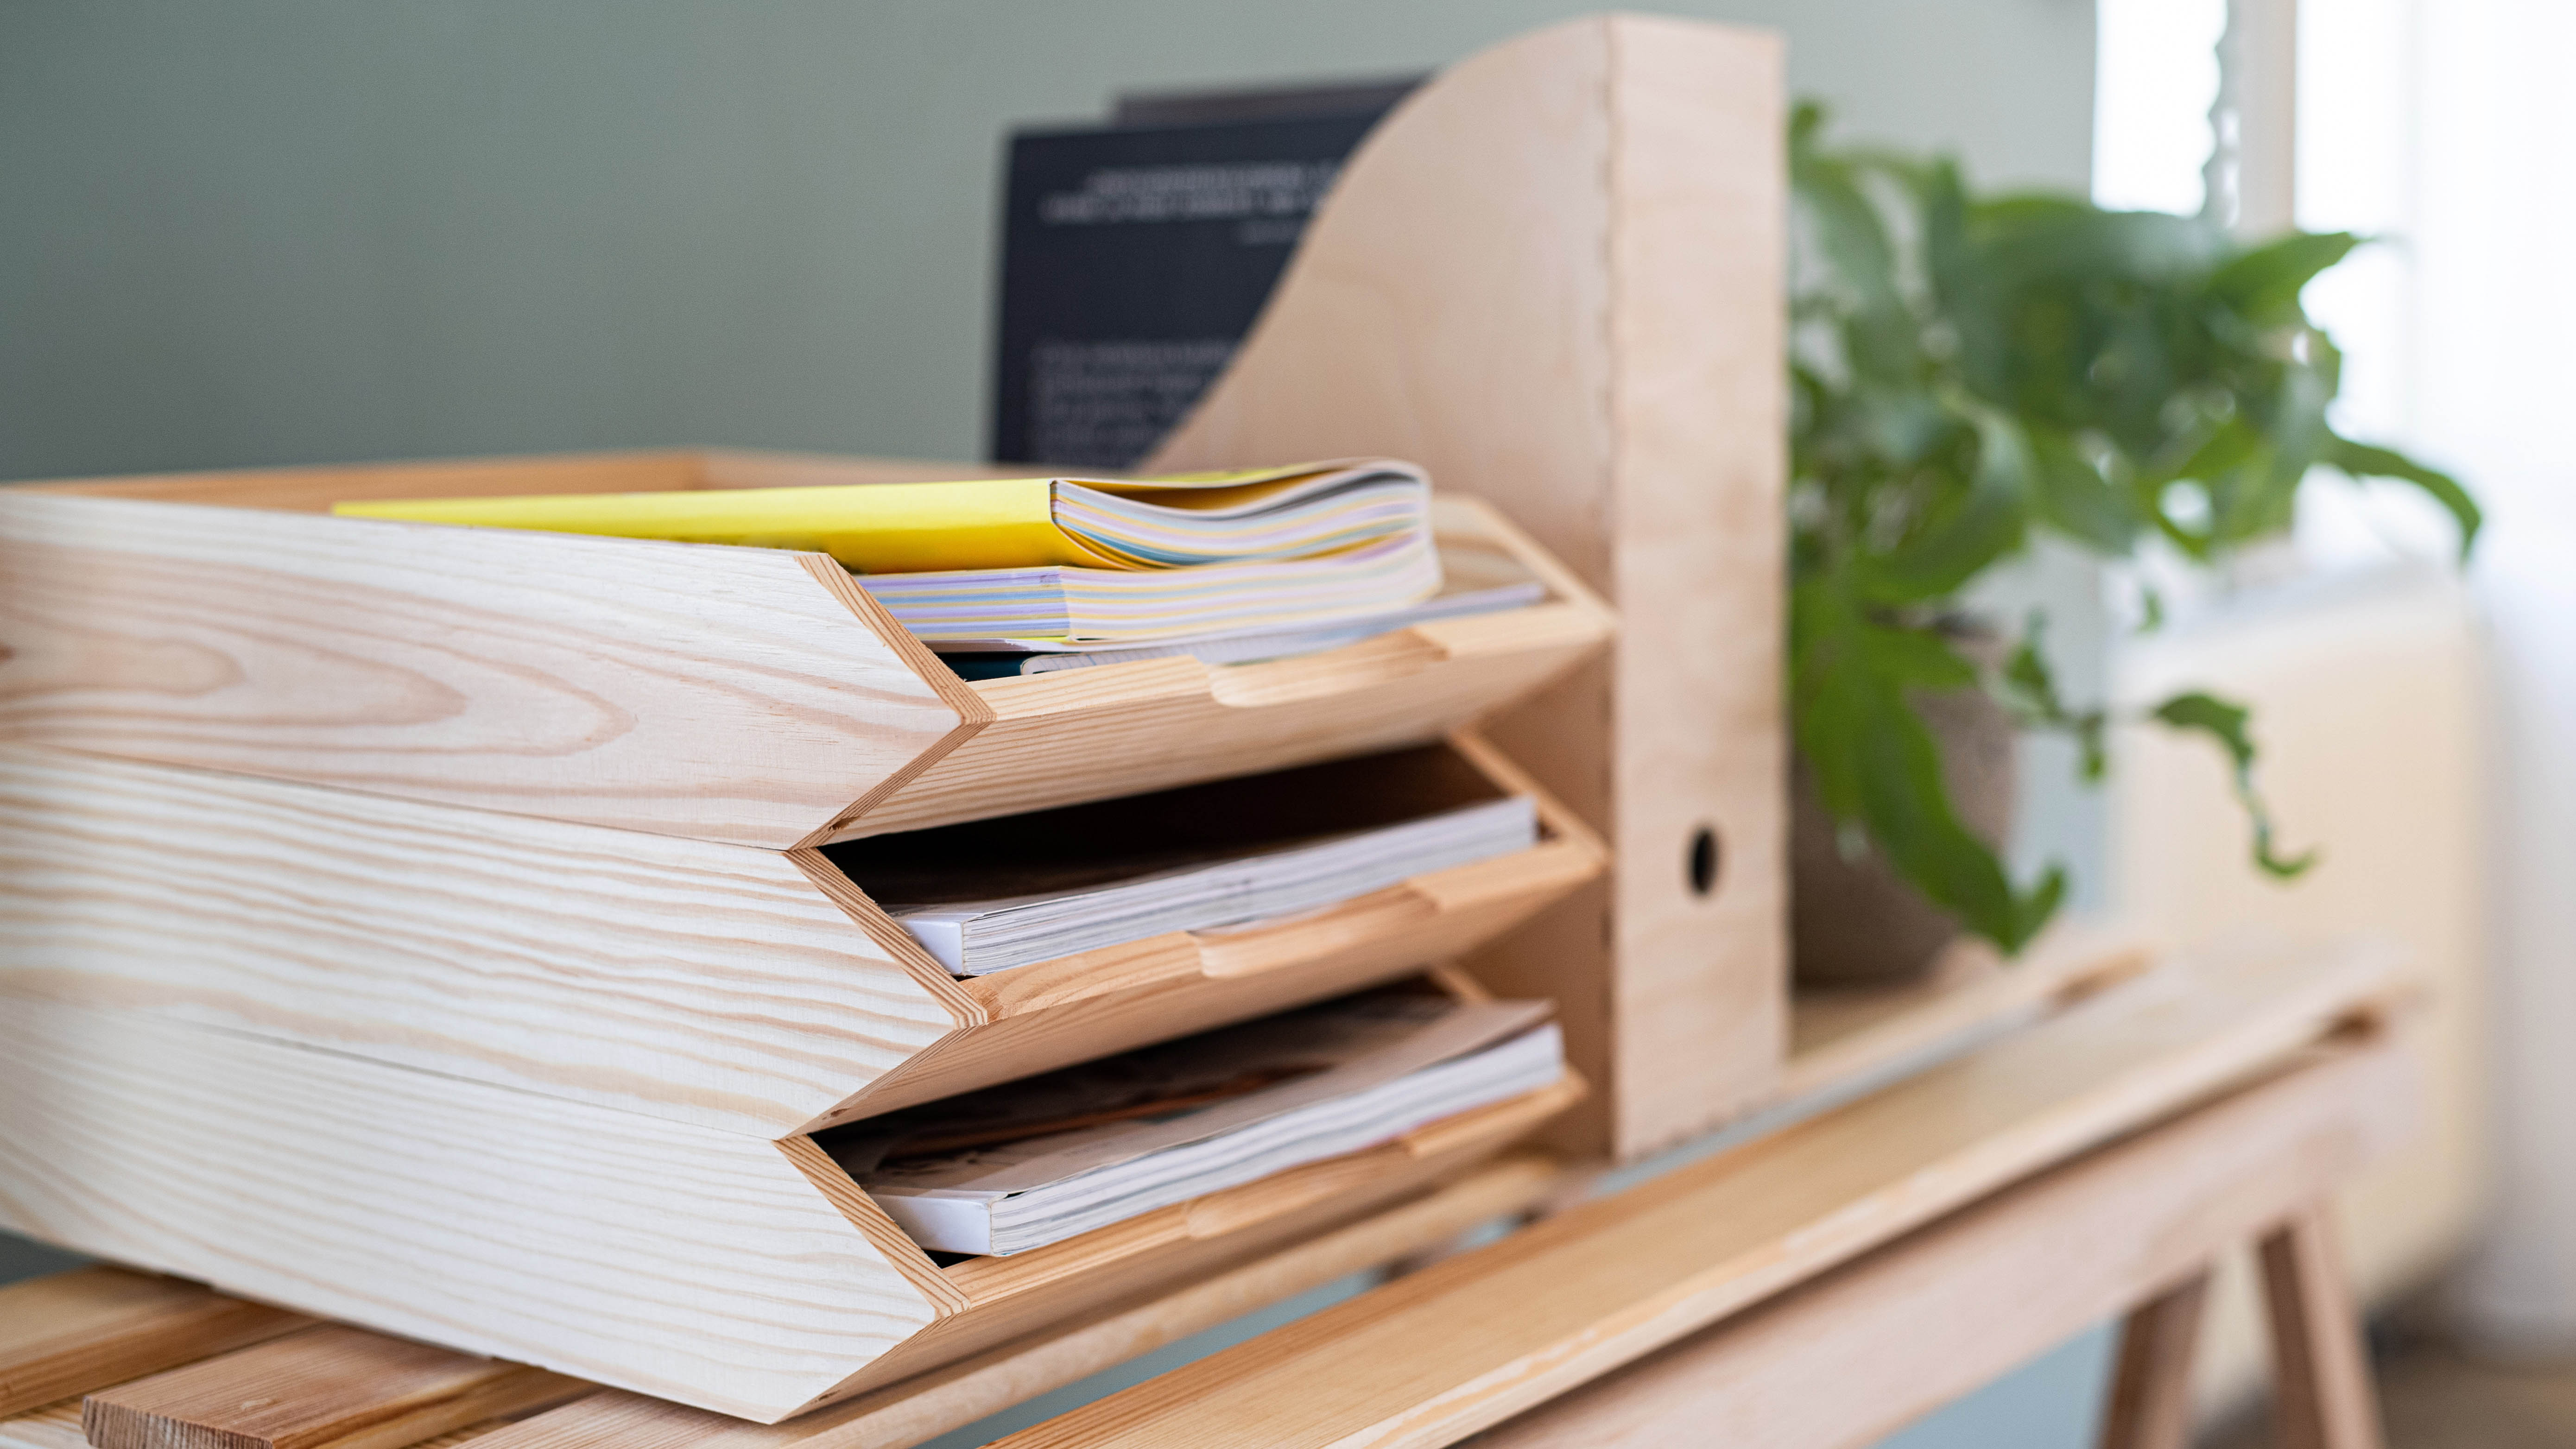 Wooden filing tray with paperwork